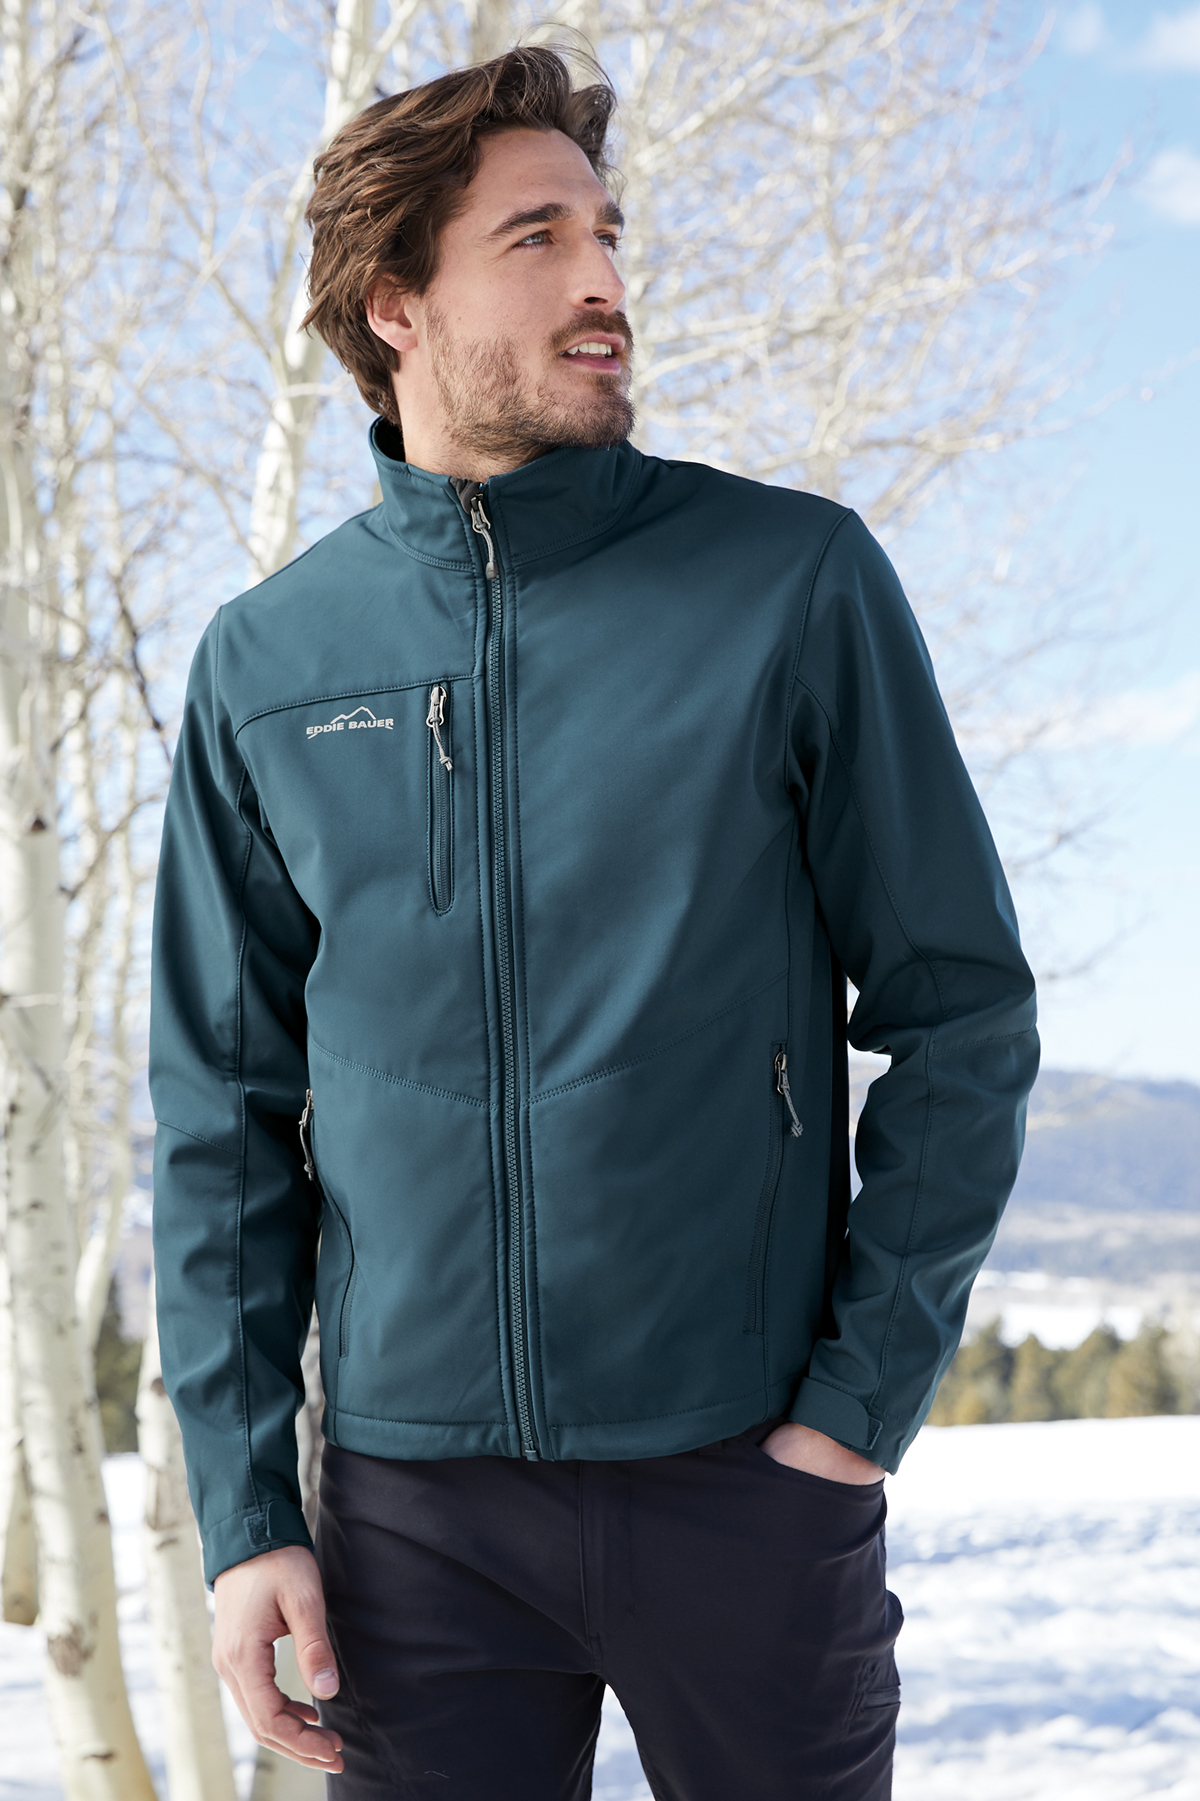 Eddie Bauer Joins Growing Retail Stable Of Simon Property